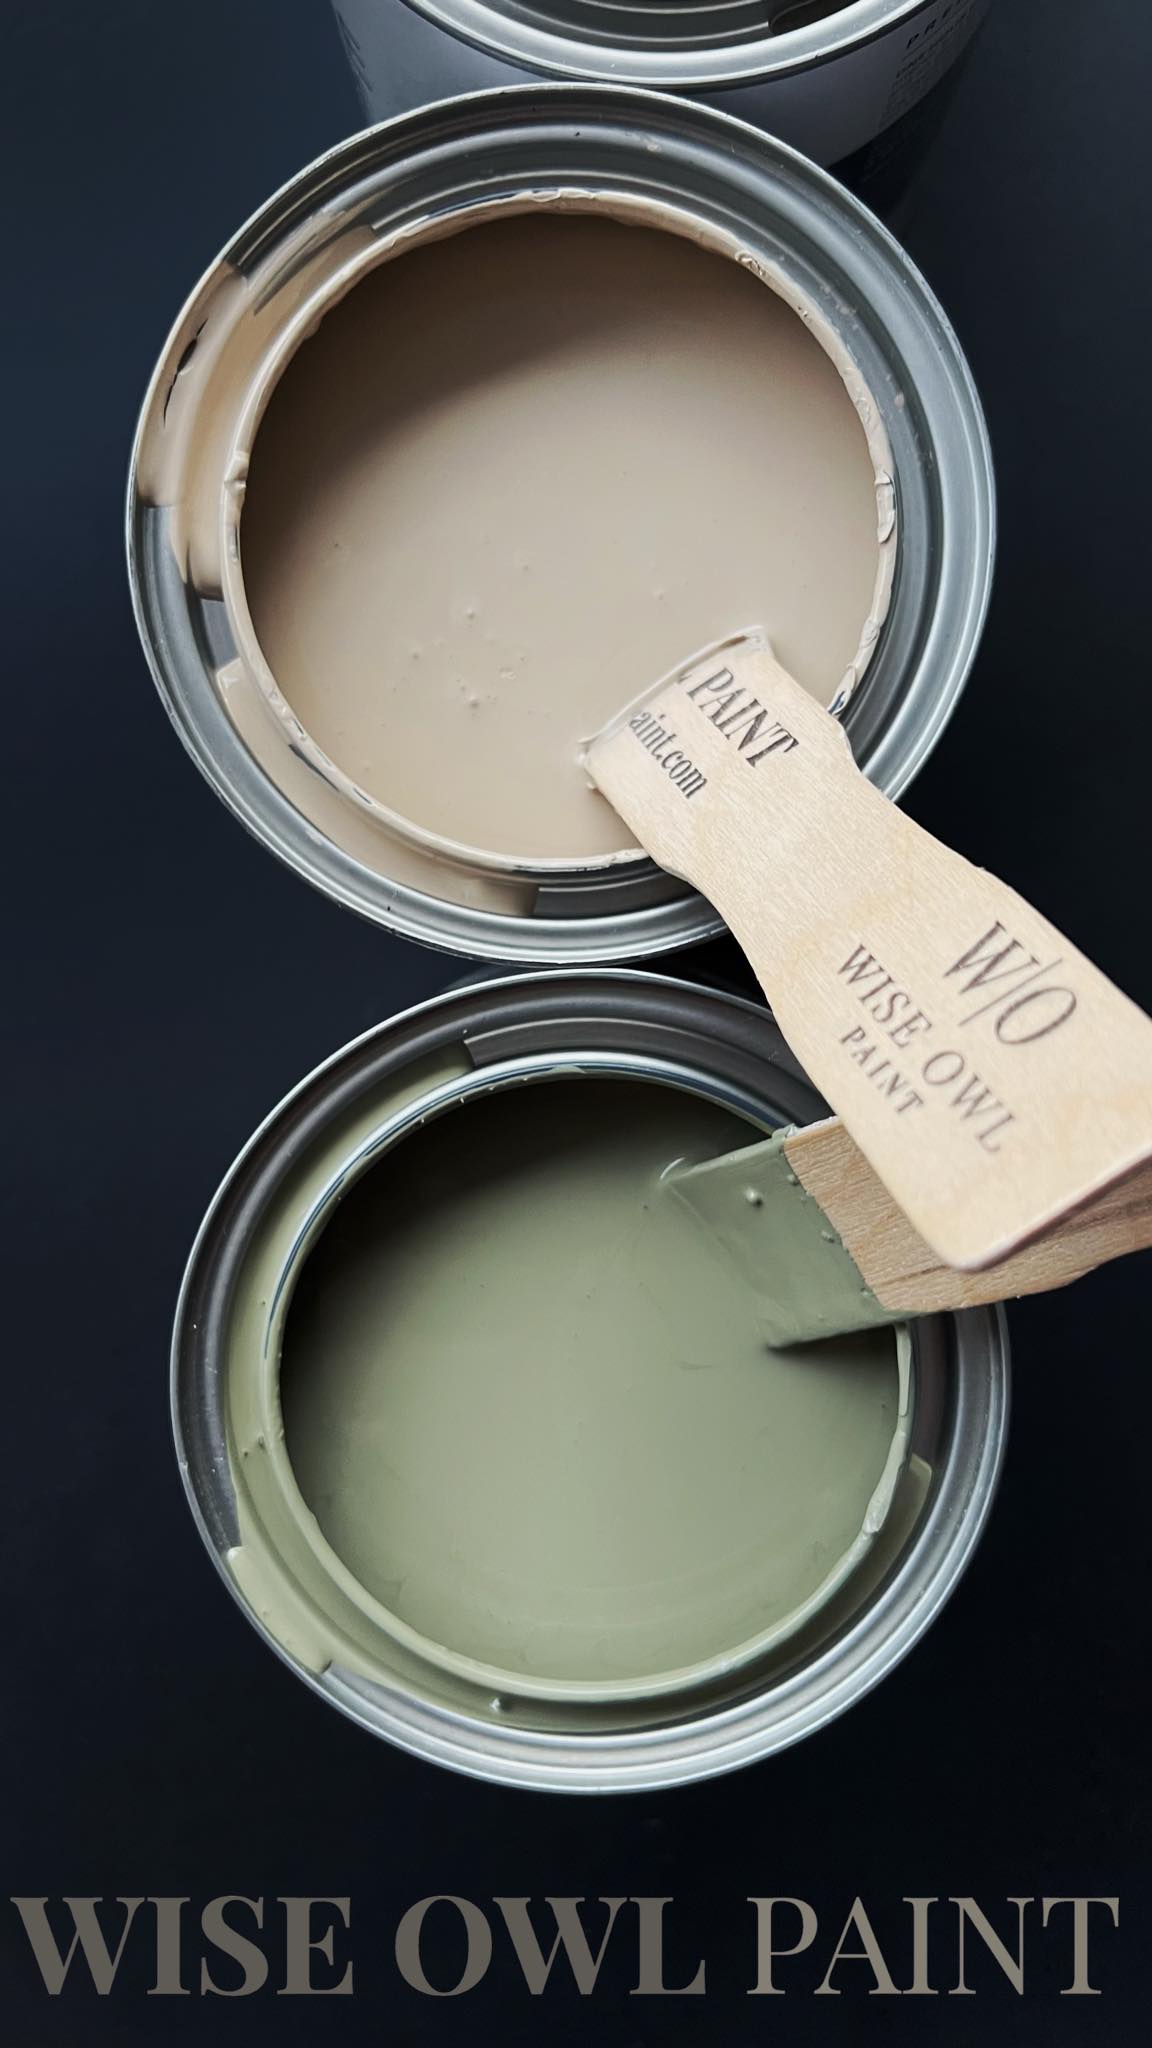 overland green and safari jacket paints in paint cans from wise owl paint one hour enamel wilderness collection. dark gray background